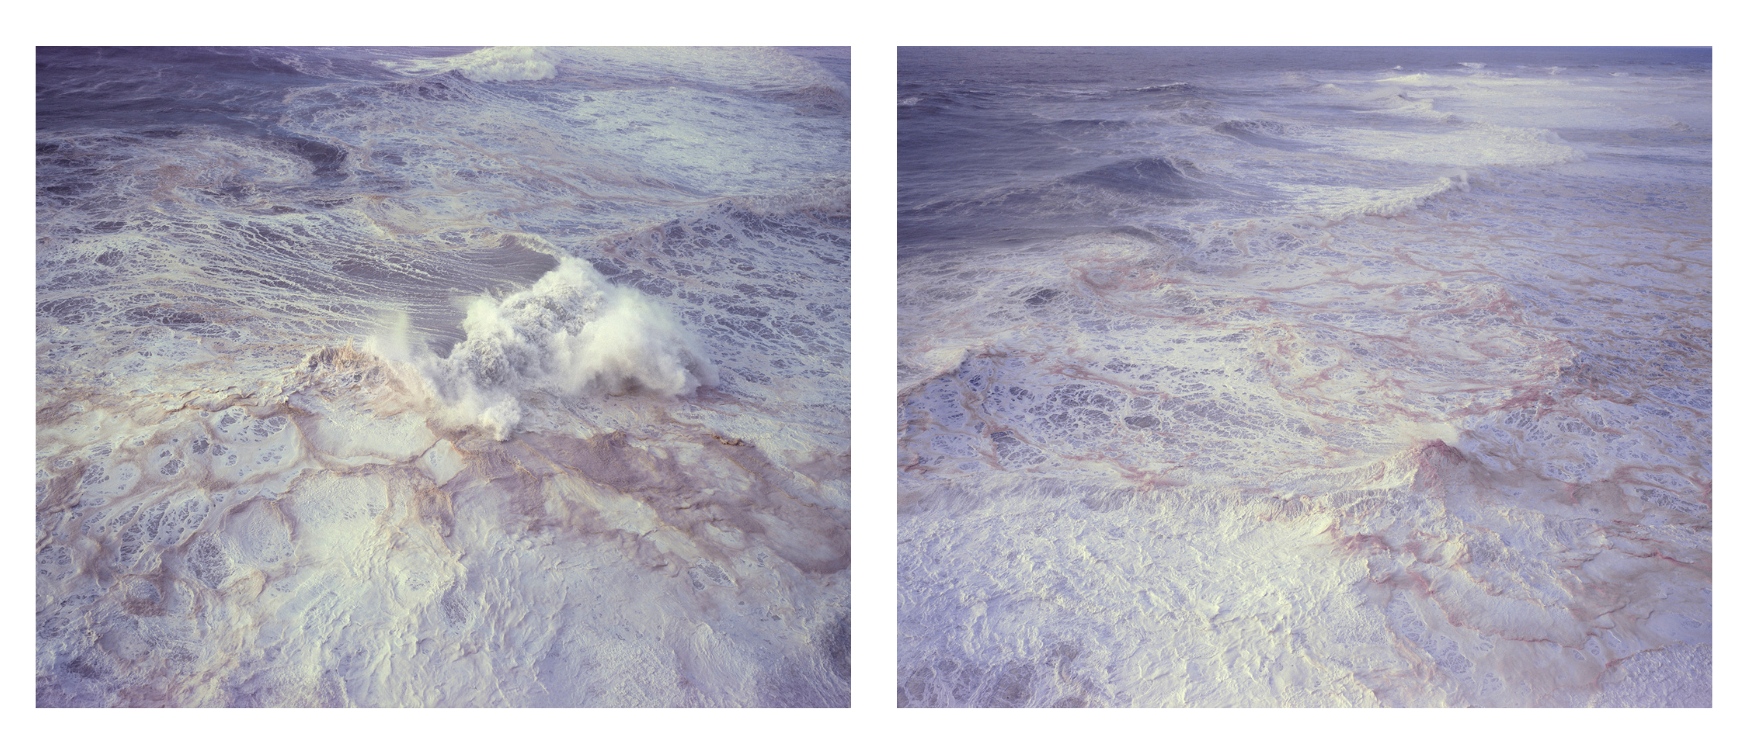 Julian Atanassov, Nazaré I & Nazaré II, Portugal, Diptych in Cooperation with sèche editions